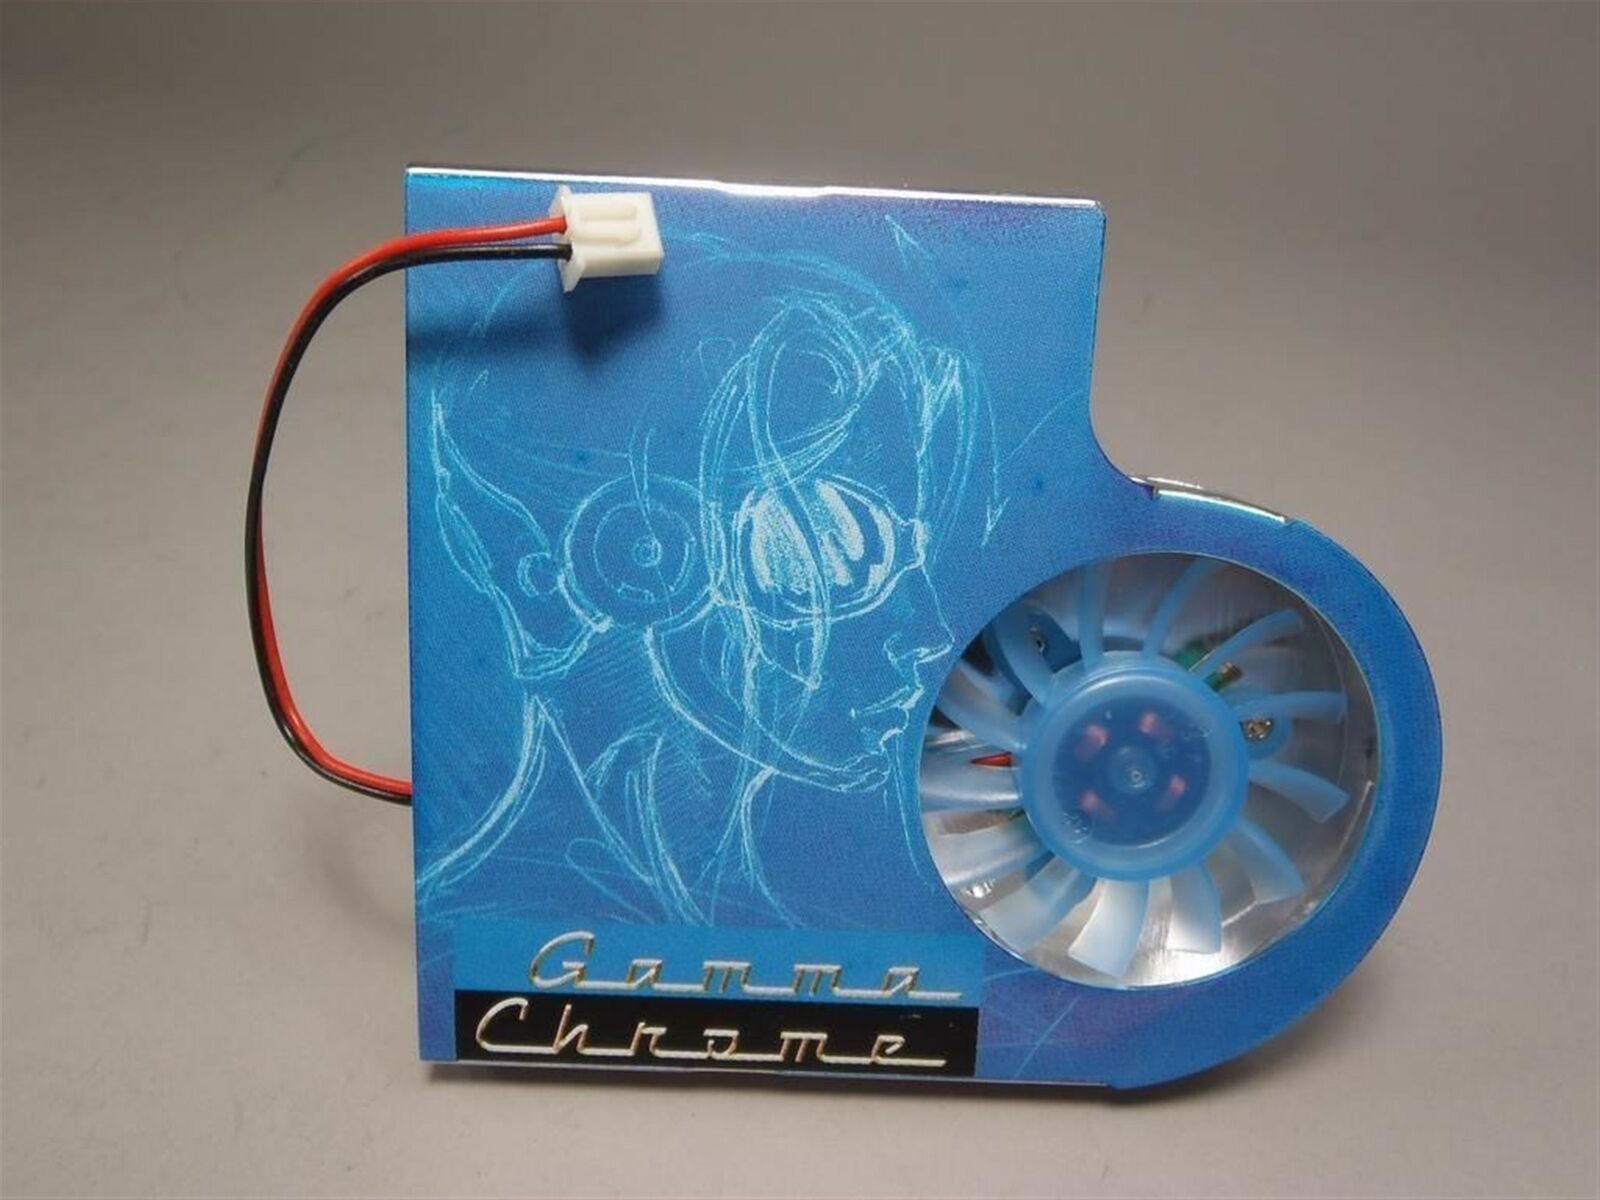 S3 Graphics Gamma Chrome S18 Card Cooling Fan -New Old Stock